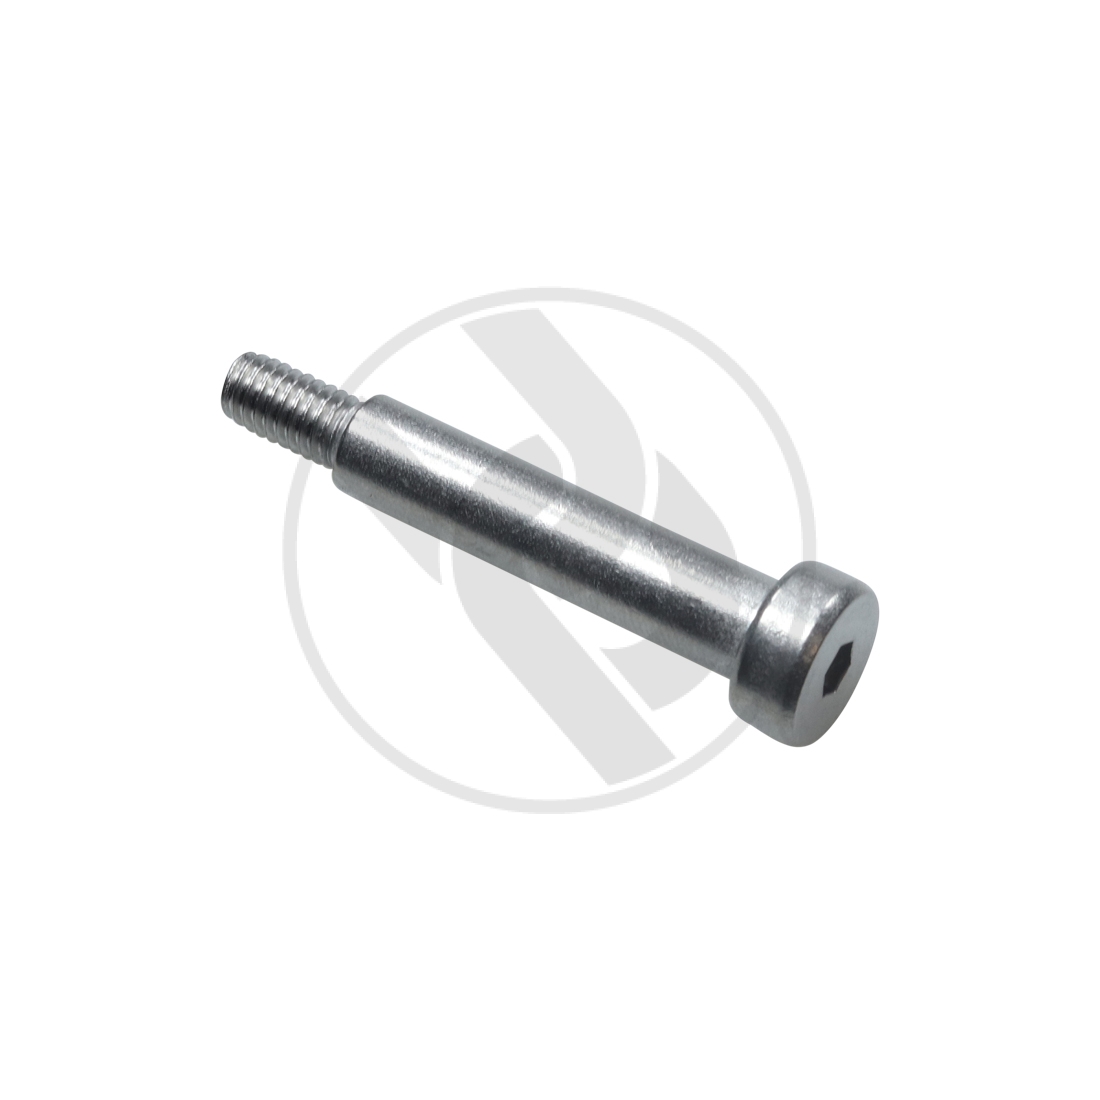 Handle tension spring for Inno-Tech